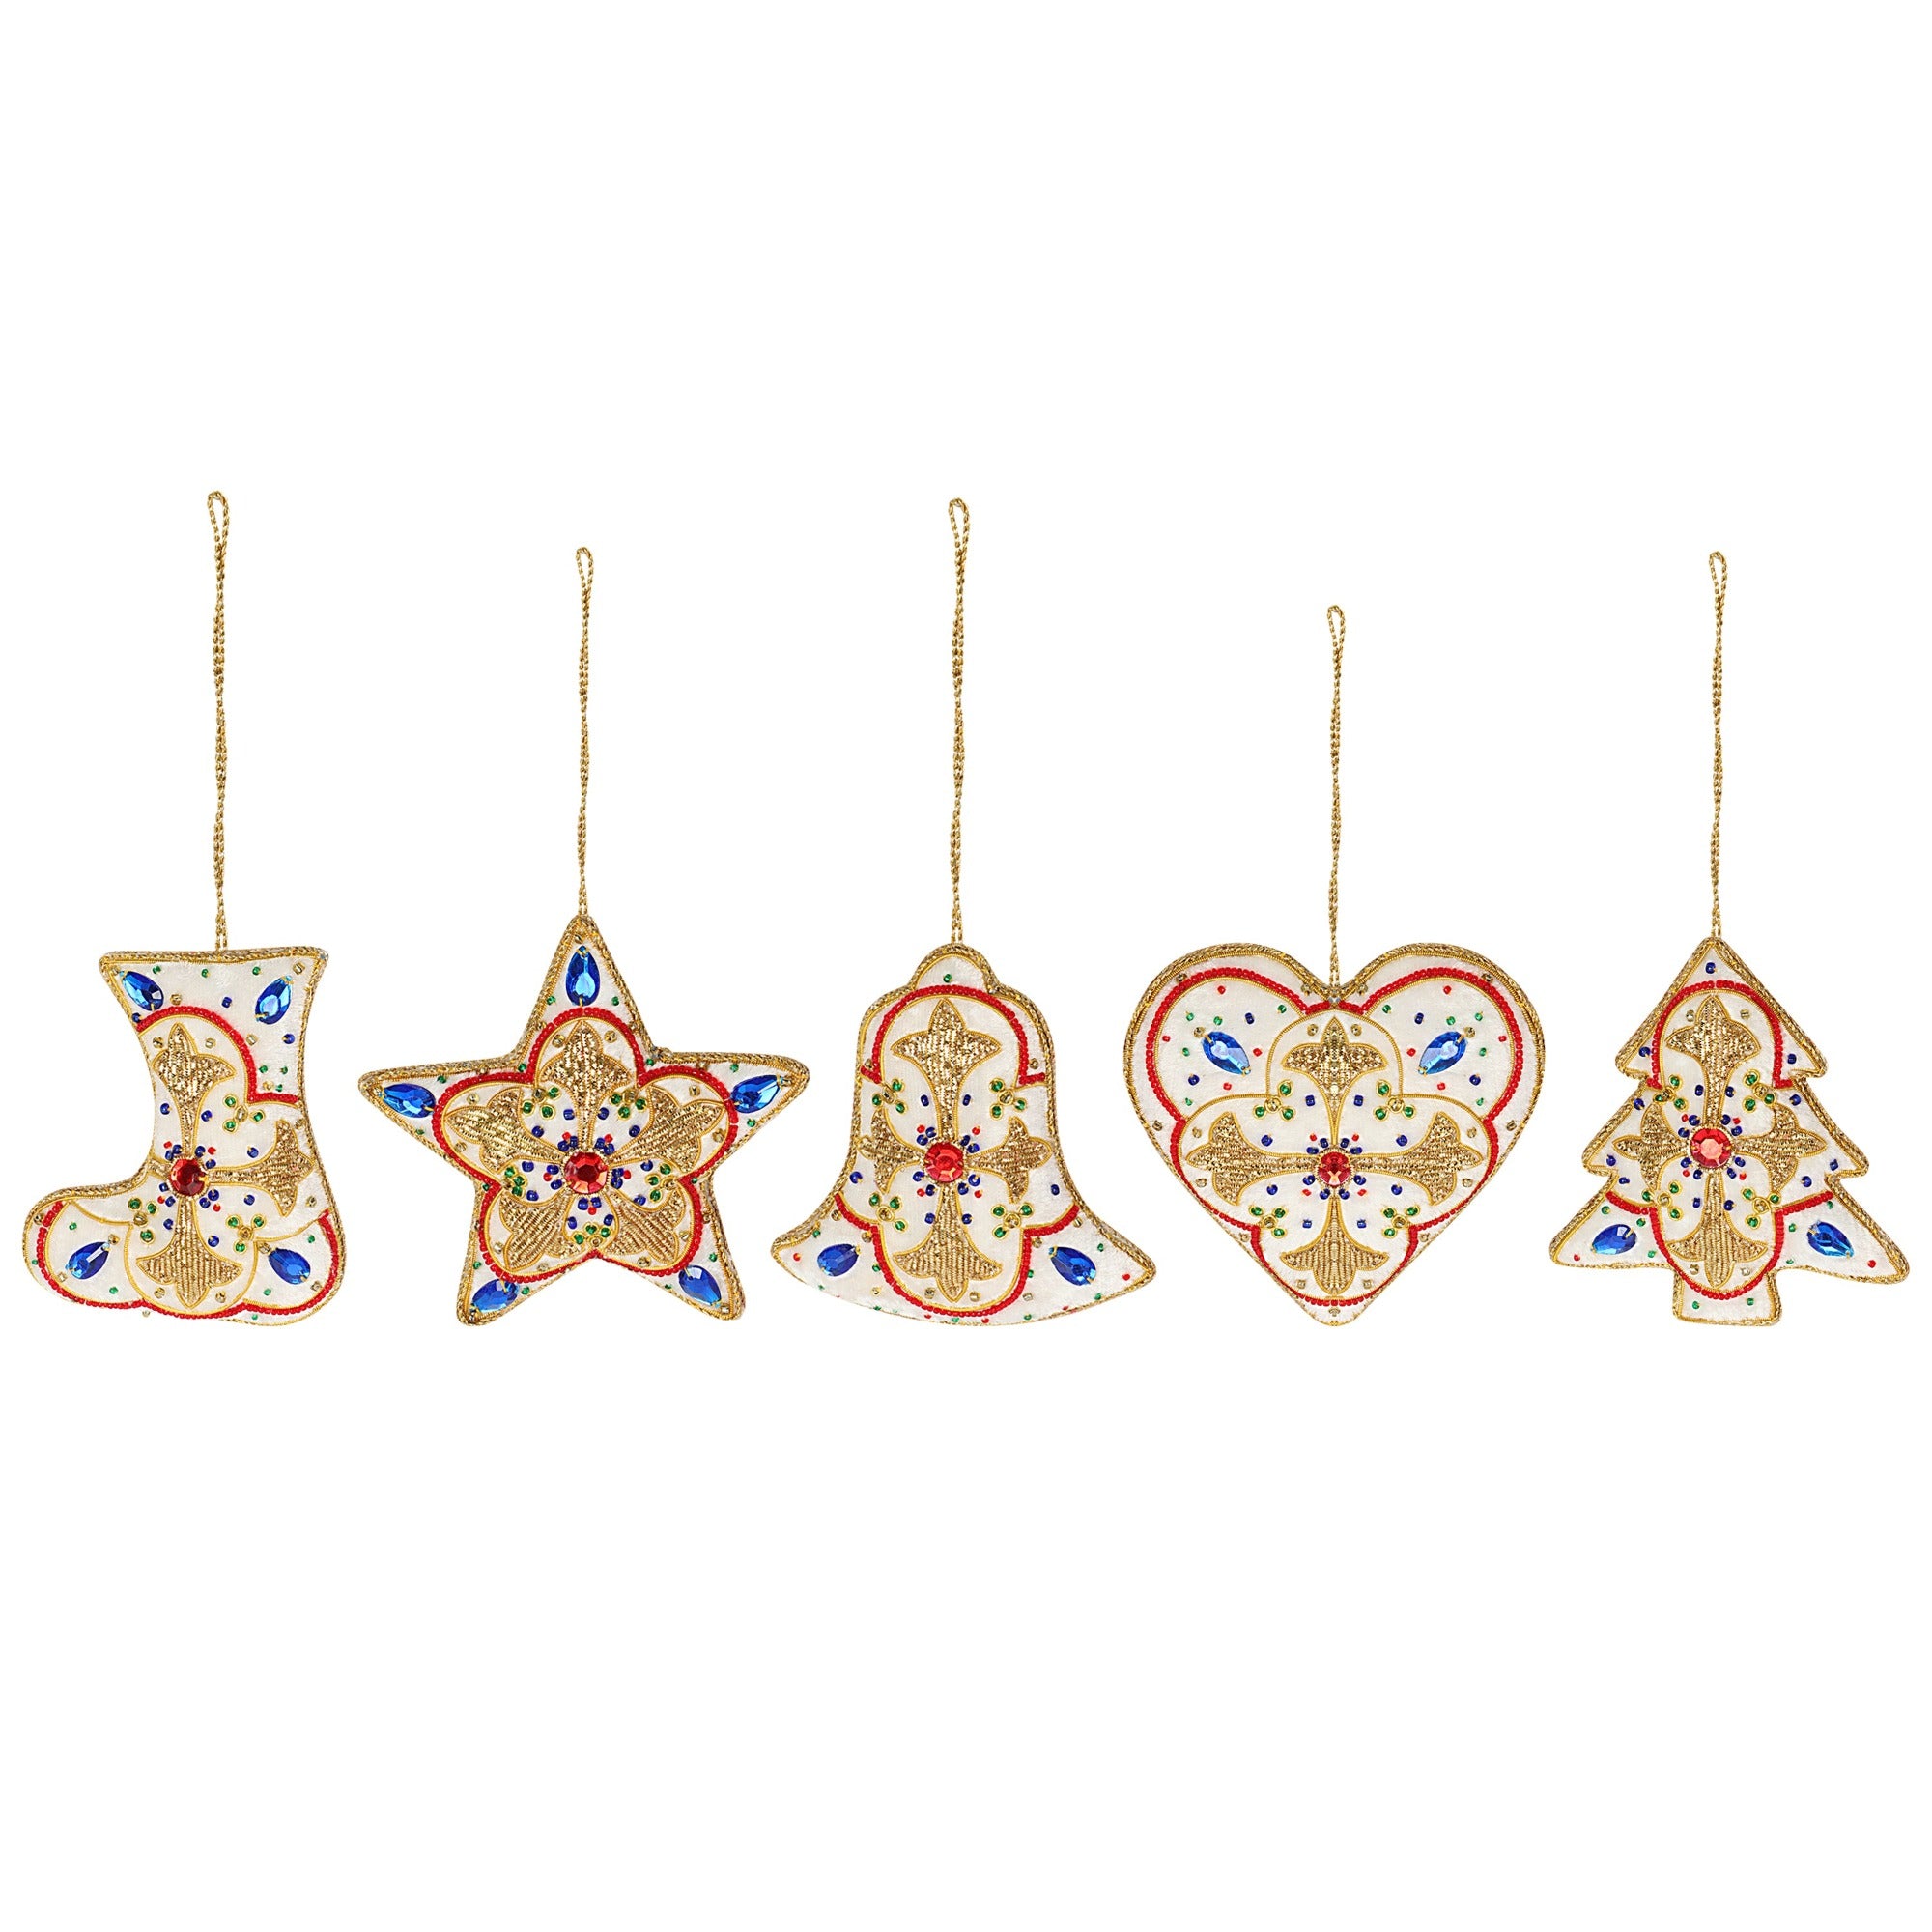 Snowy Sparkle - Stars, Hearts, Bell, Shoe & tree Christmas ornaments set of 5 pieces for holiday decor (1SET=5PC)